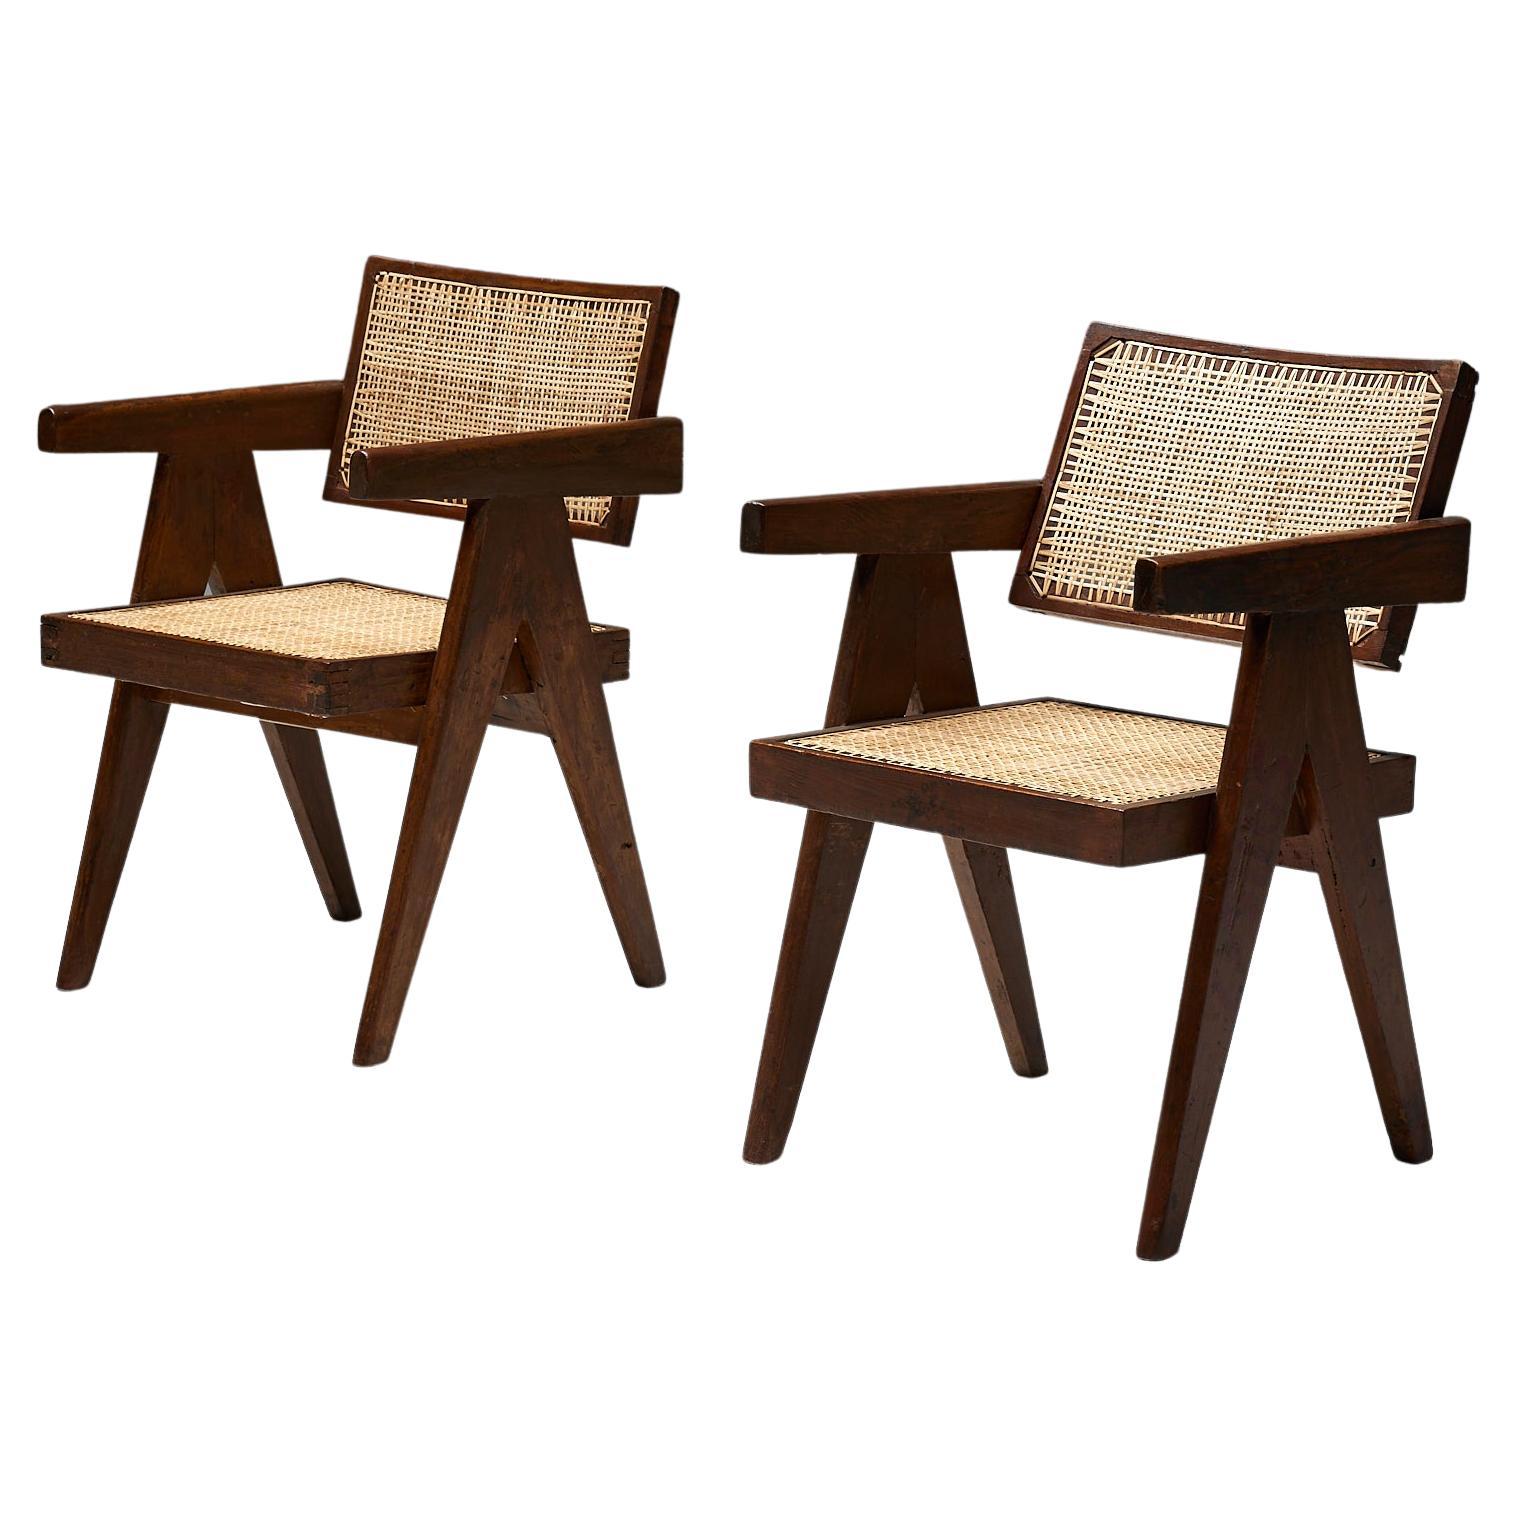 Office Cane Chairs by Pierre Jeanneret, India, 1955